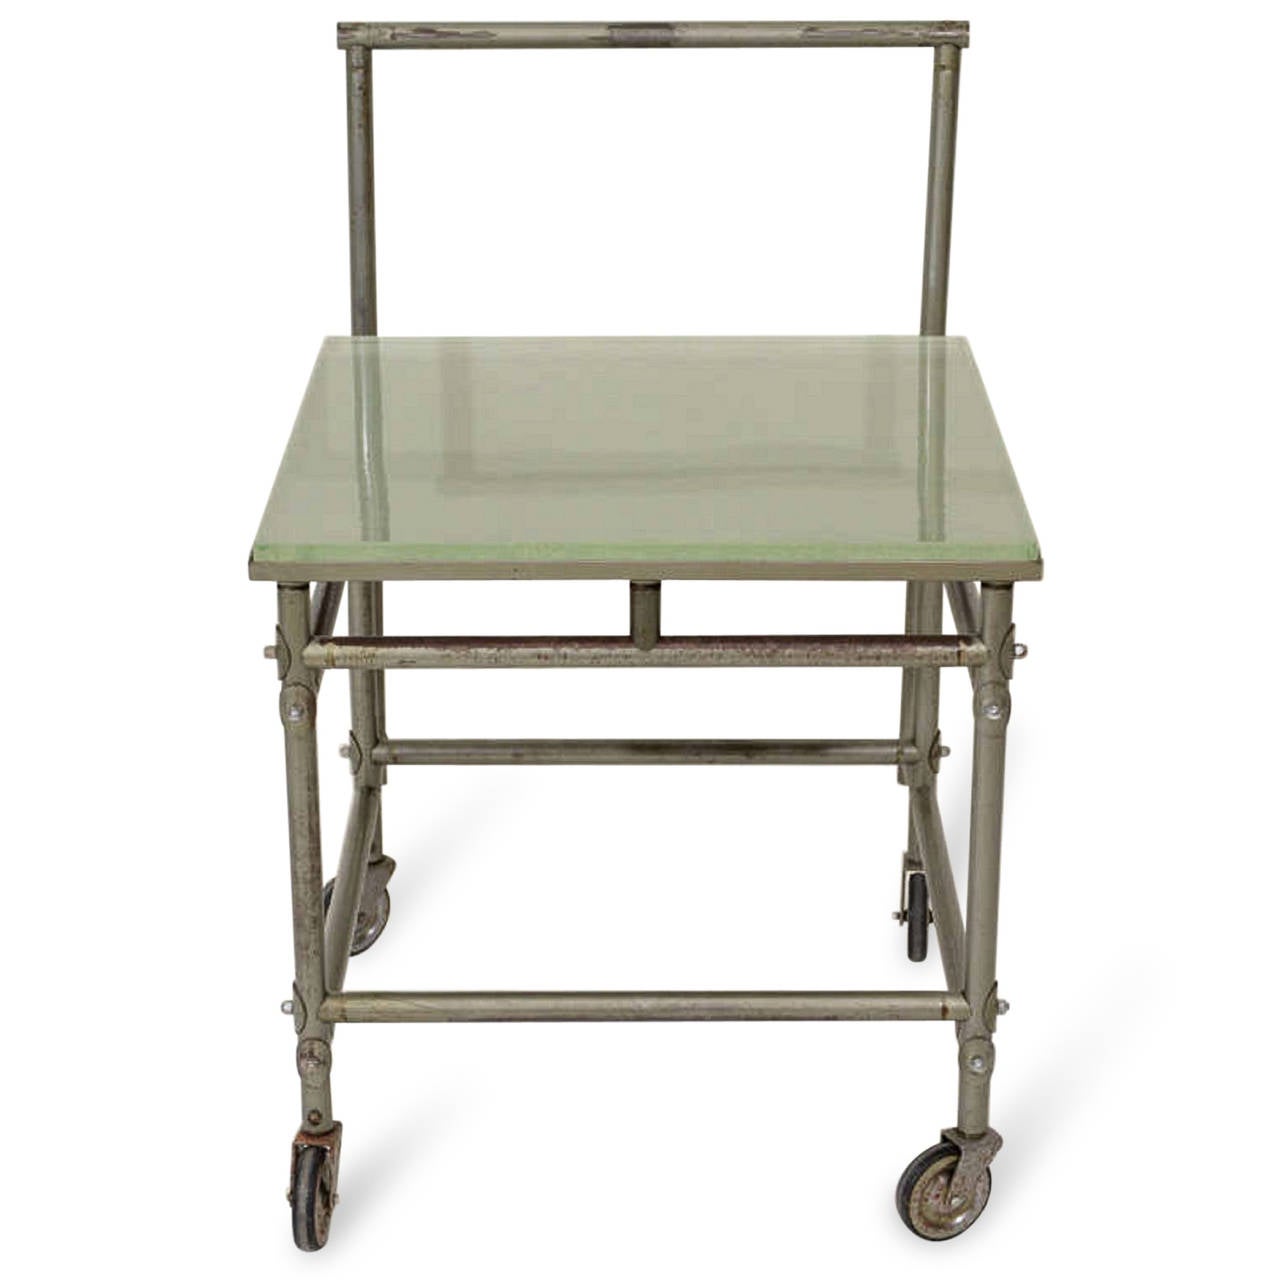 Industrial rolling cart with 1 inch thick St Gobain glass top, on casters. By Rene Herbst, French 1930s. Width 21 in, depth 24 in, height 31 in.

WINTER SALE - 40% OFF - One Week Only !!

(Price shown is reduced price, no further trade